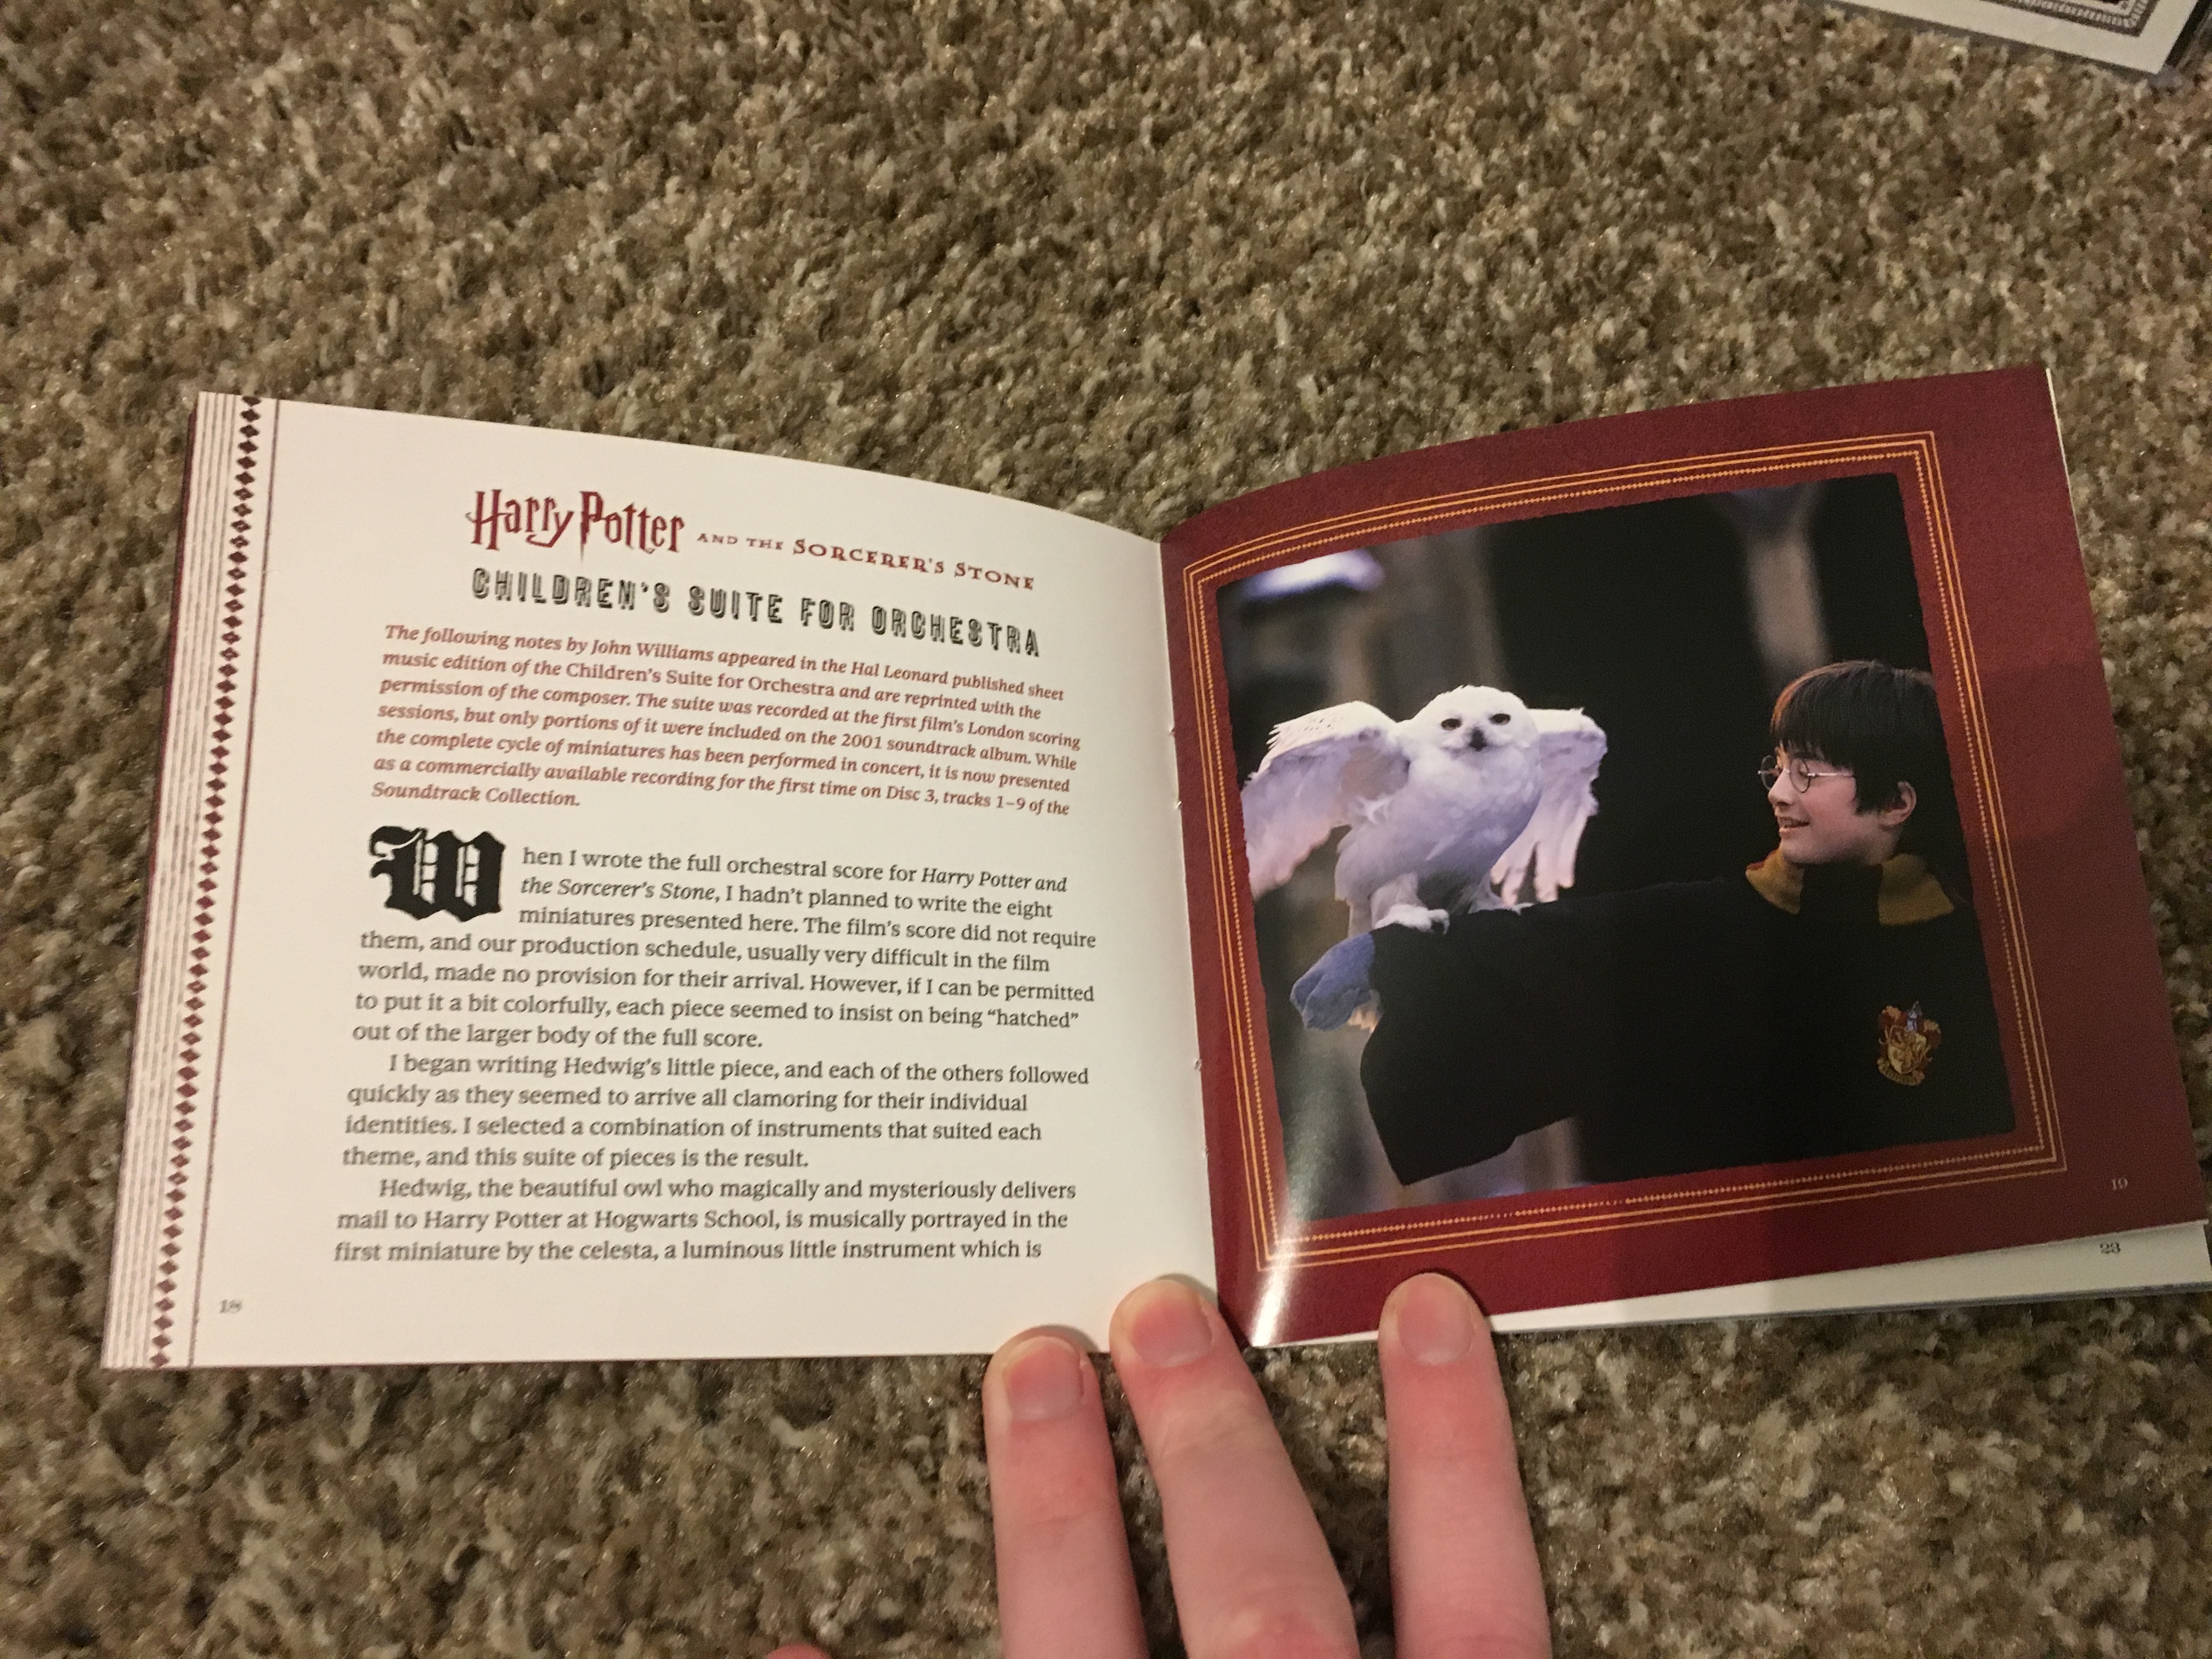 “Harry Potter: The John Williams Soundtrack Collection”, “Sorcerer’s Stone” liner notes